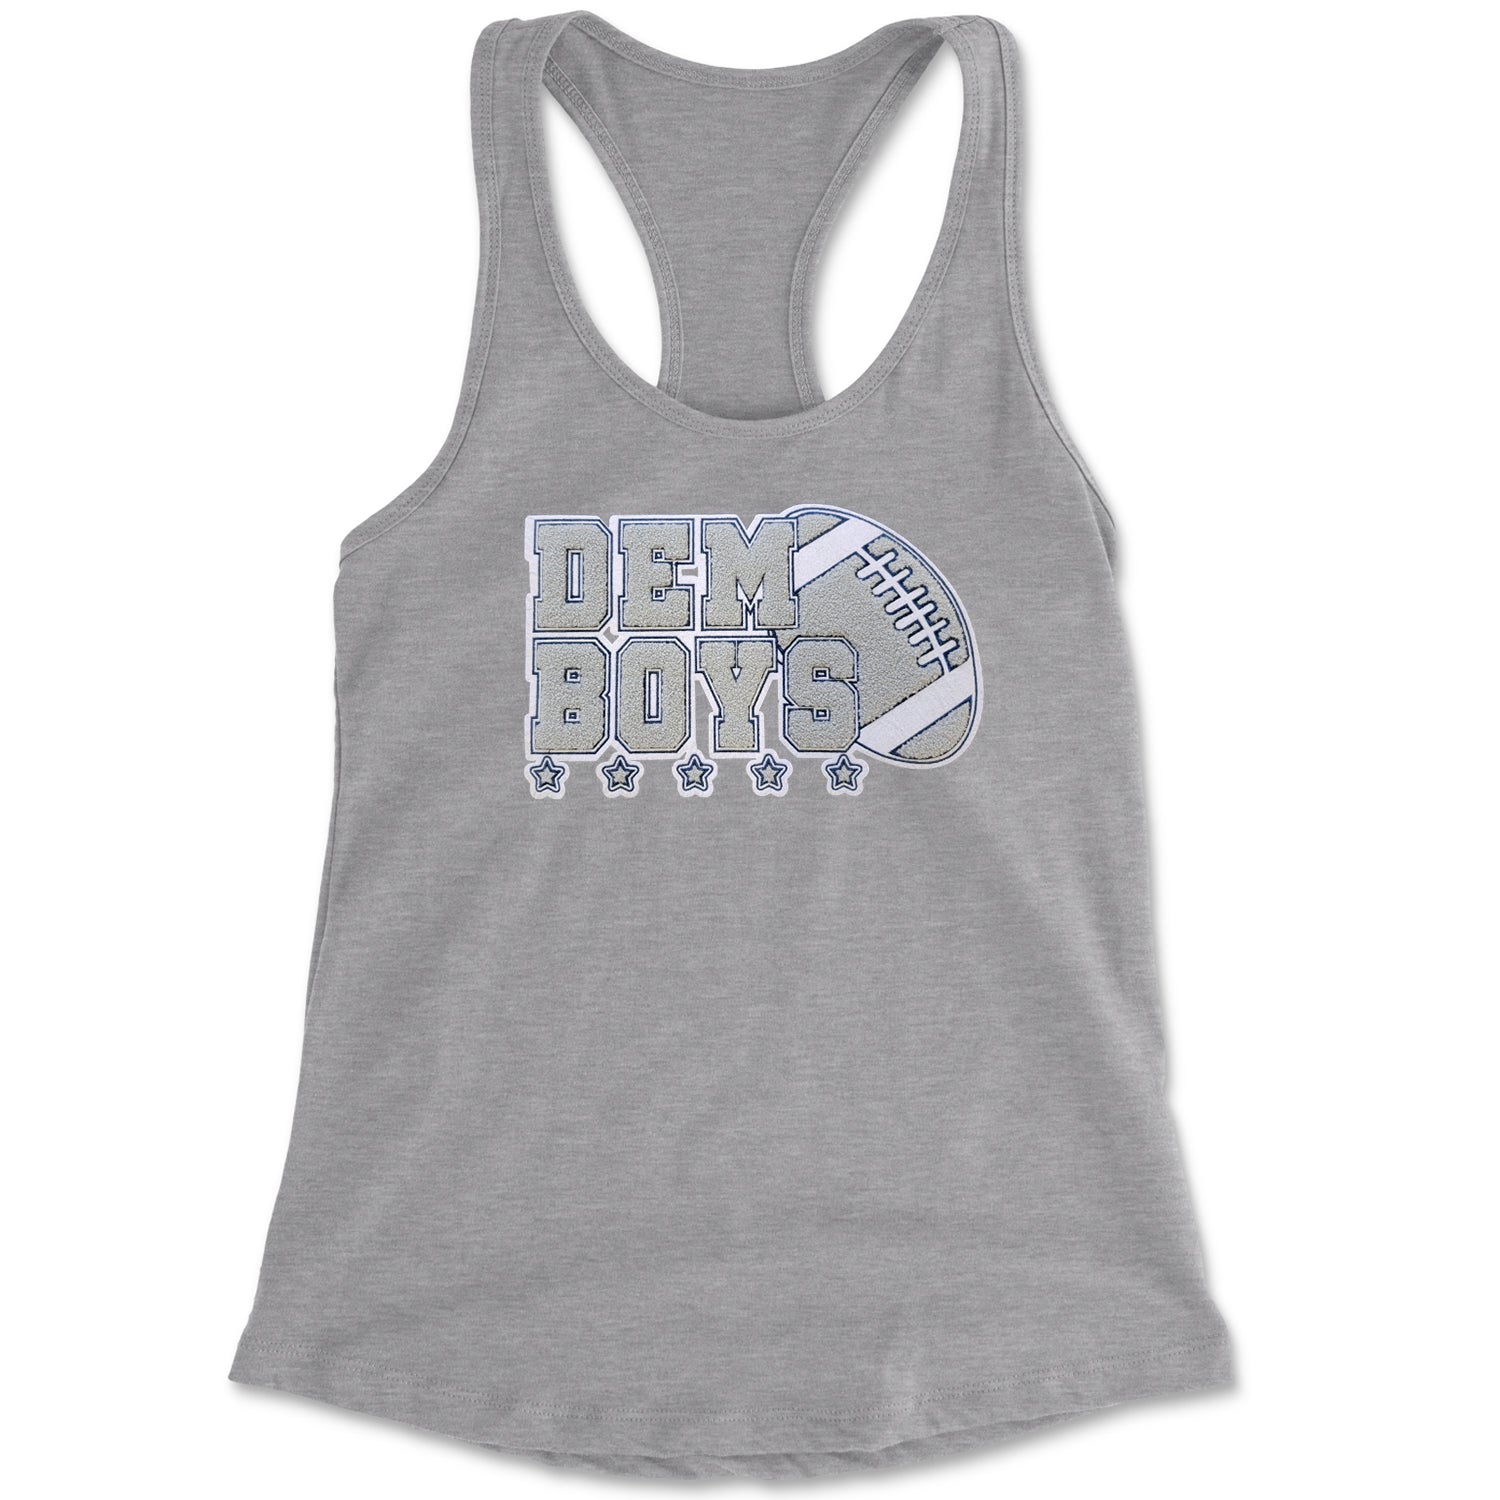 Dem Boys Embroidered Patch 2 Racerback Tank Top for Women dallas, fan, jersey, team, texas by Expression Tees